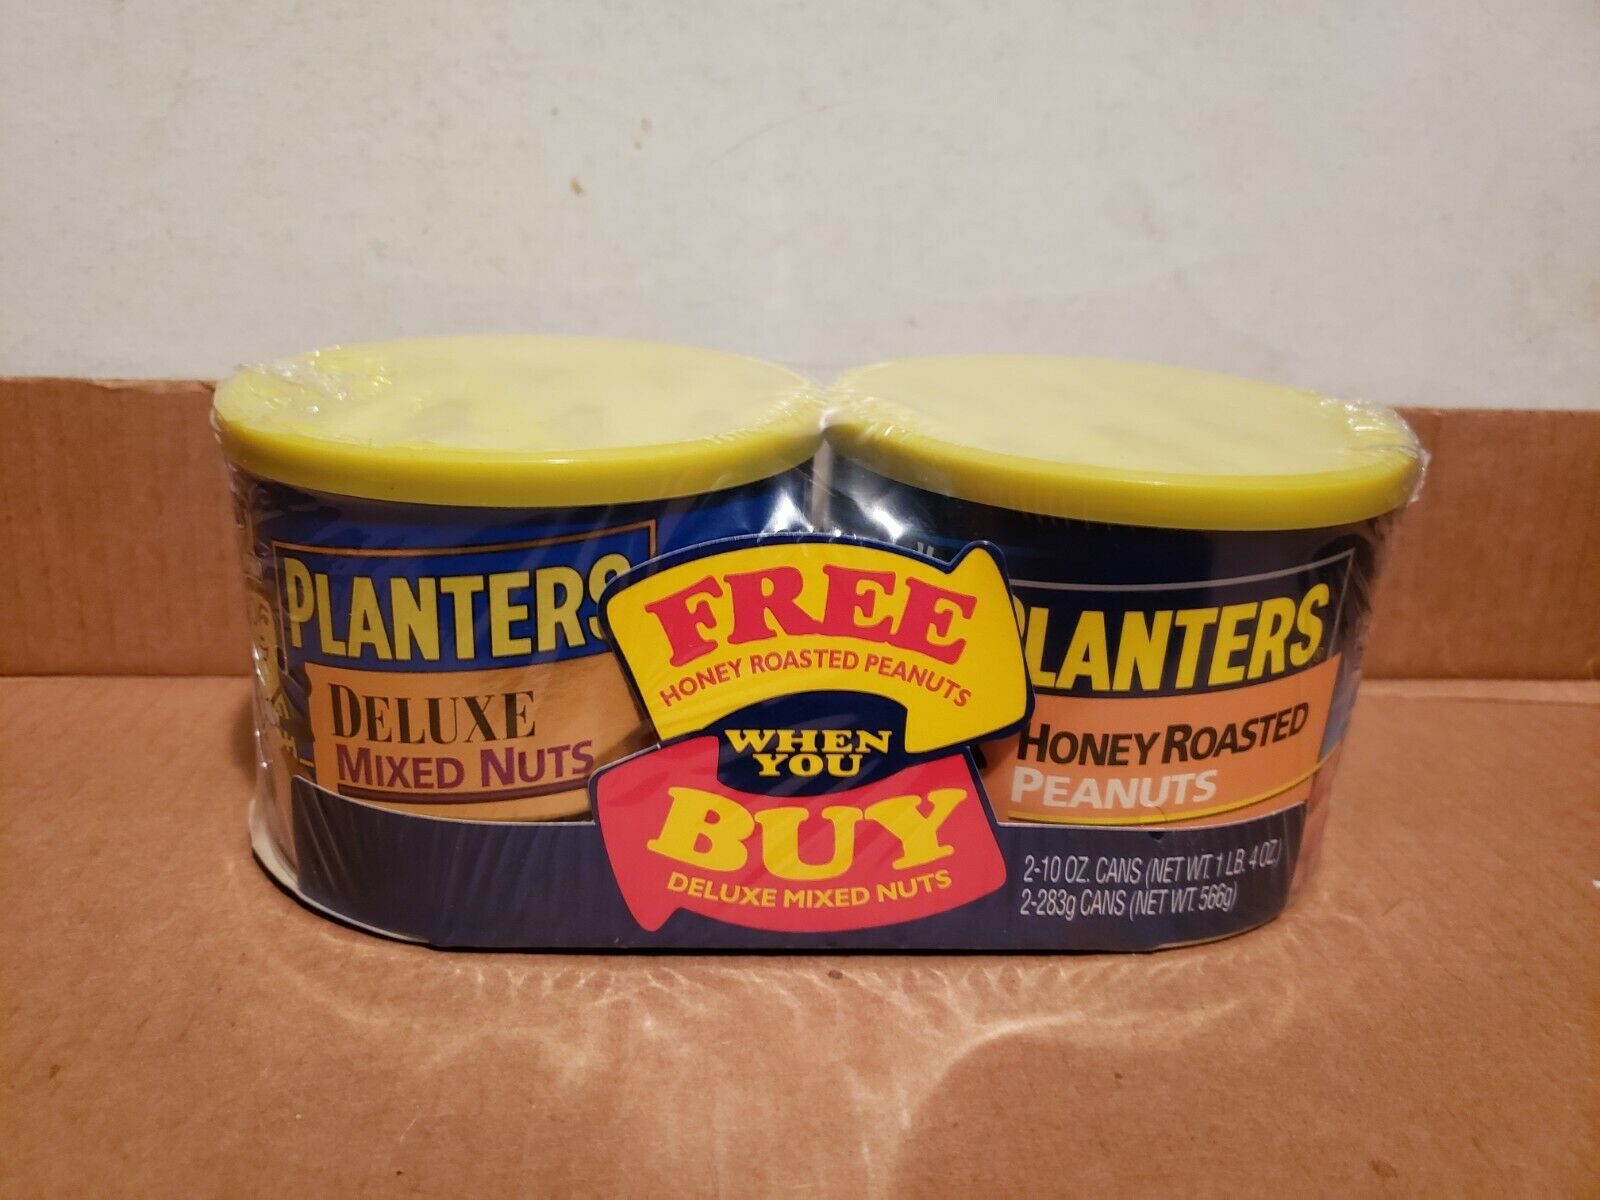 Planters Peanut Cans 10 Oz Free Honey Roasted When You Buy Deluxe Mixed Nuts #39